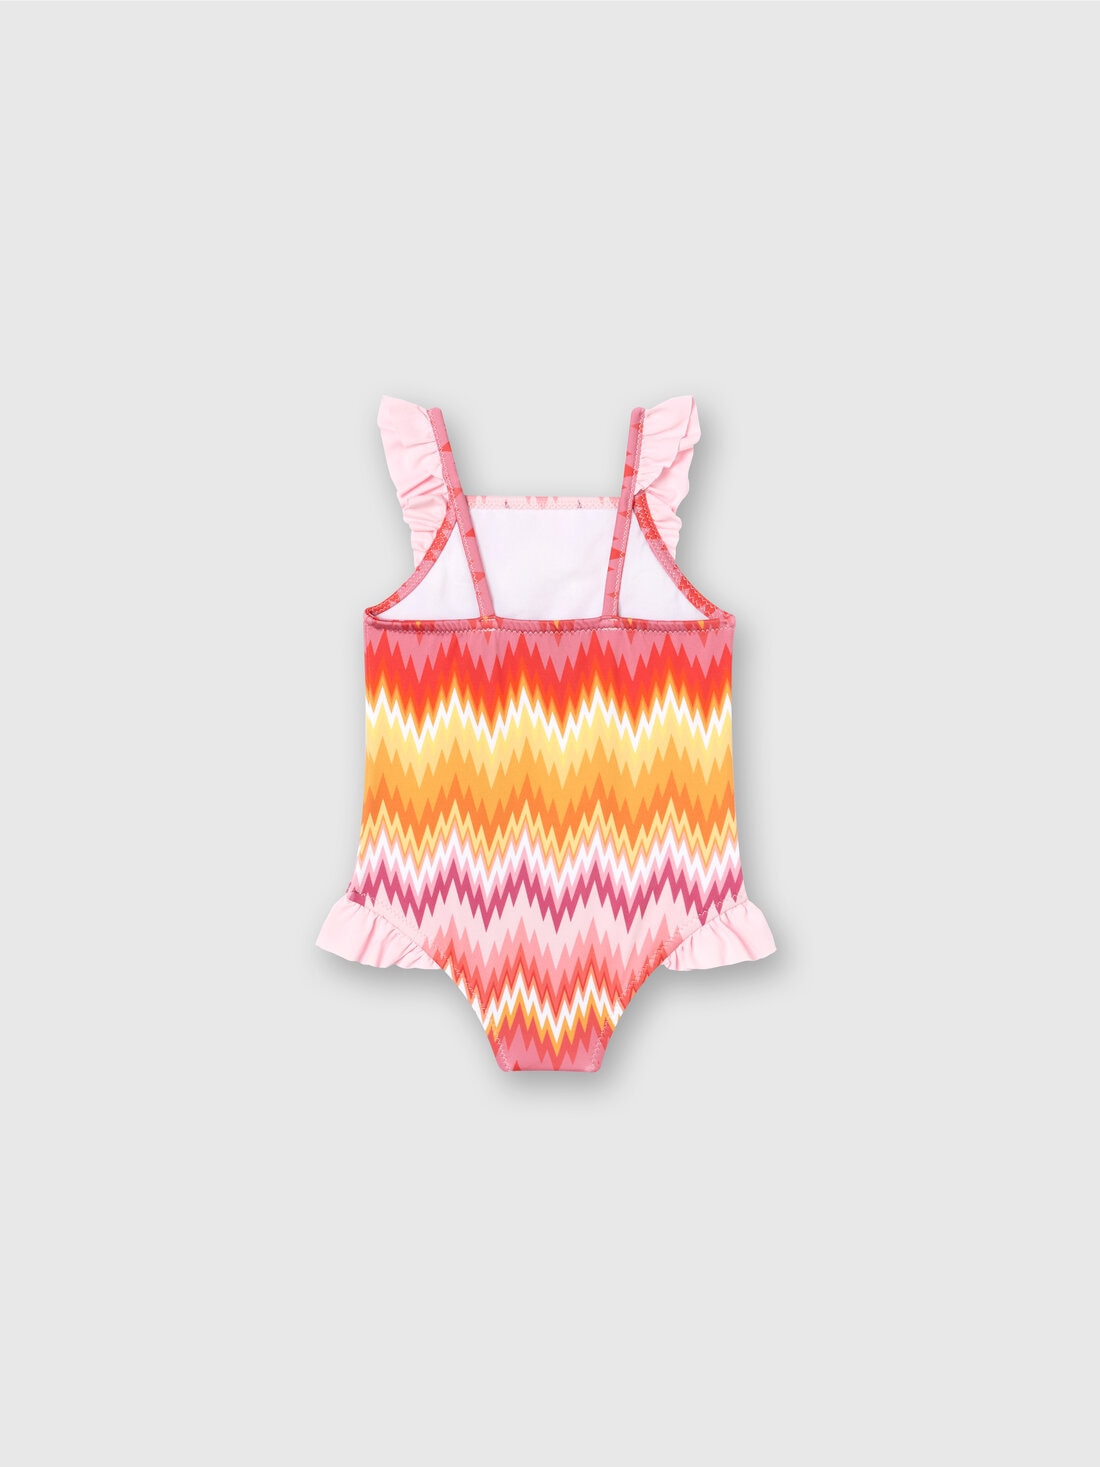 One-piece swimming costume with chevron pattern, ruffle and logo, Multicoloured  - KS24SP06BV00FVSM923 - 1